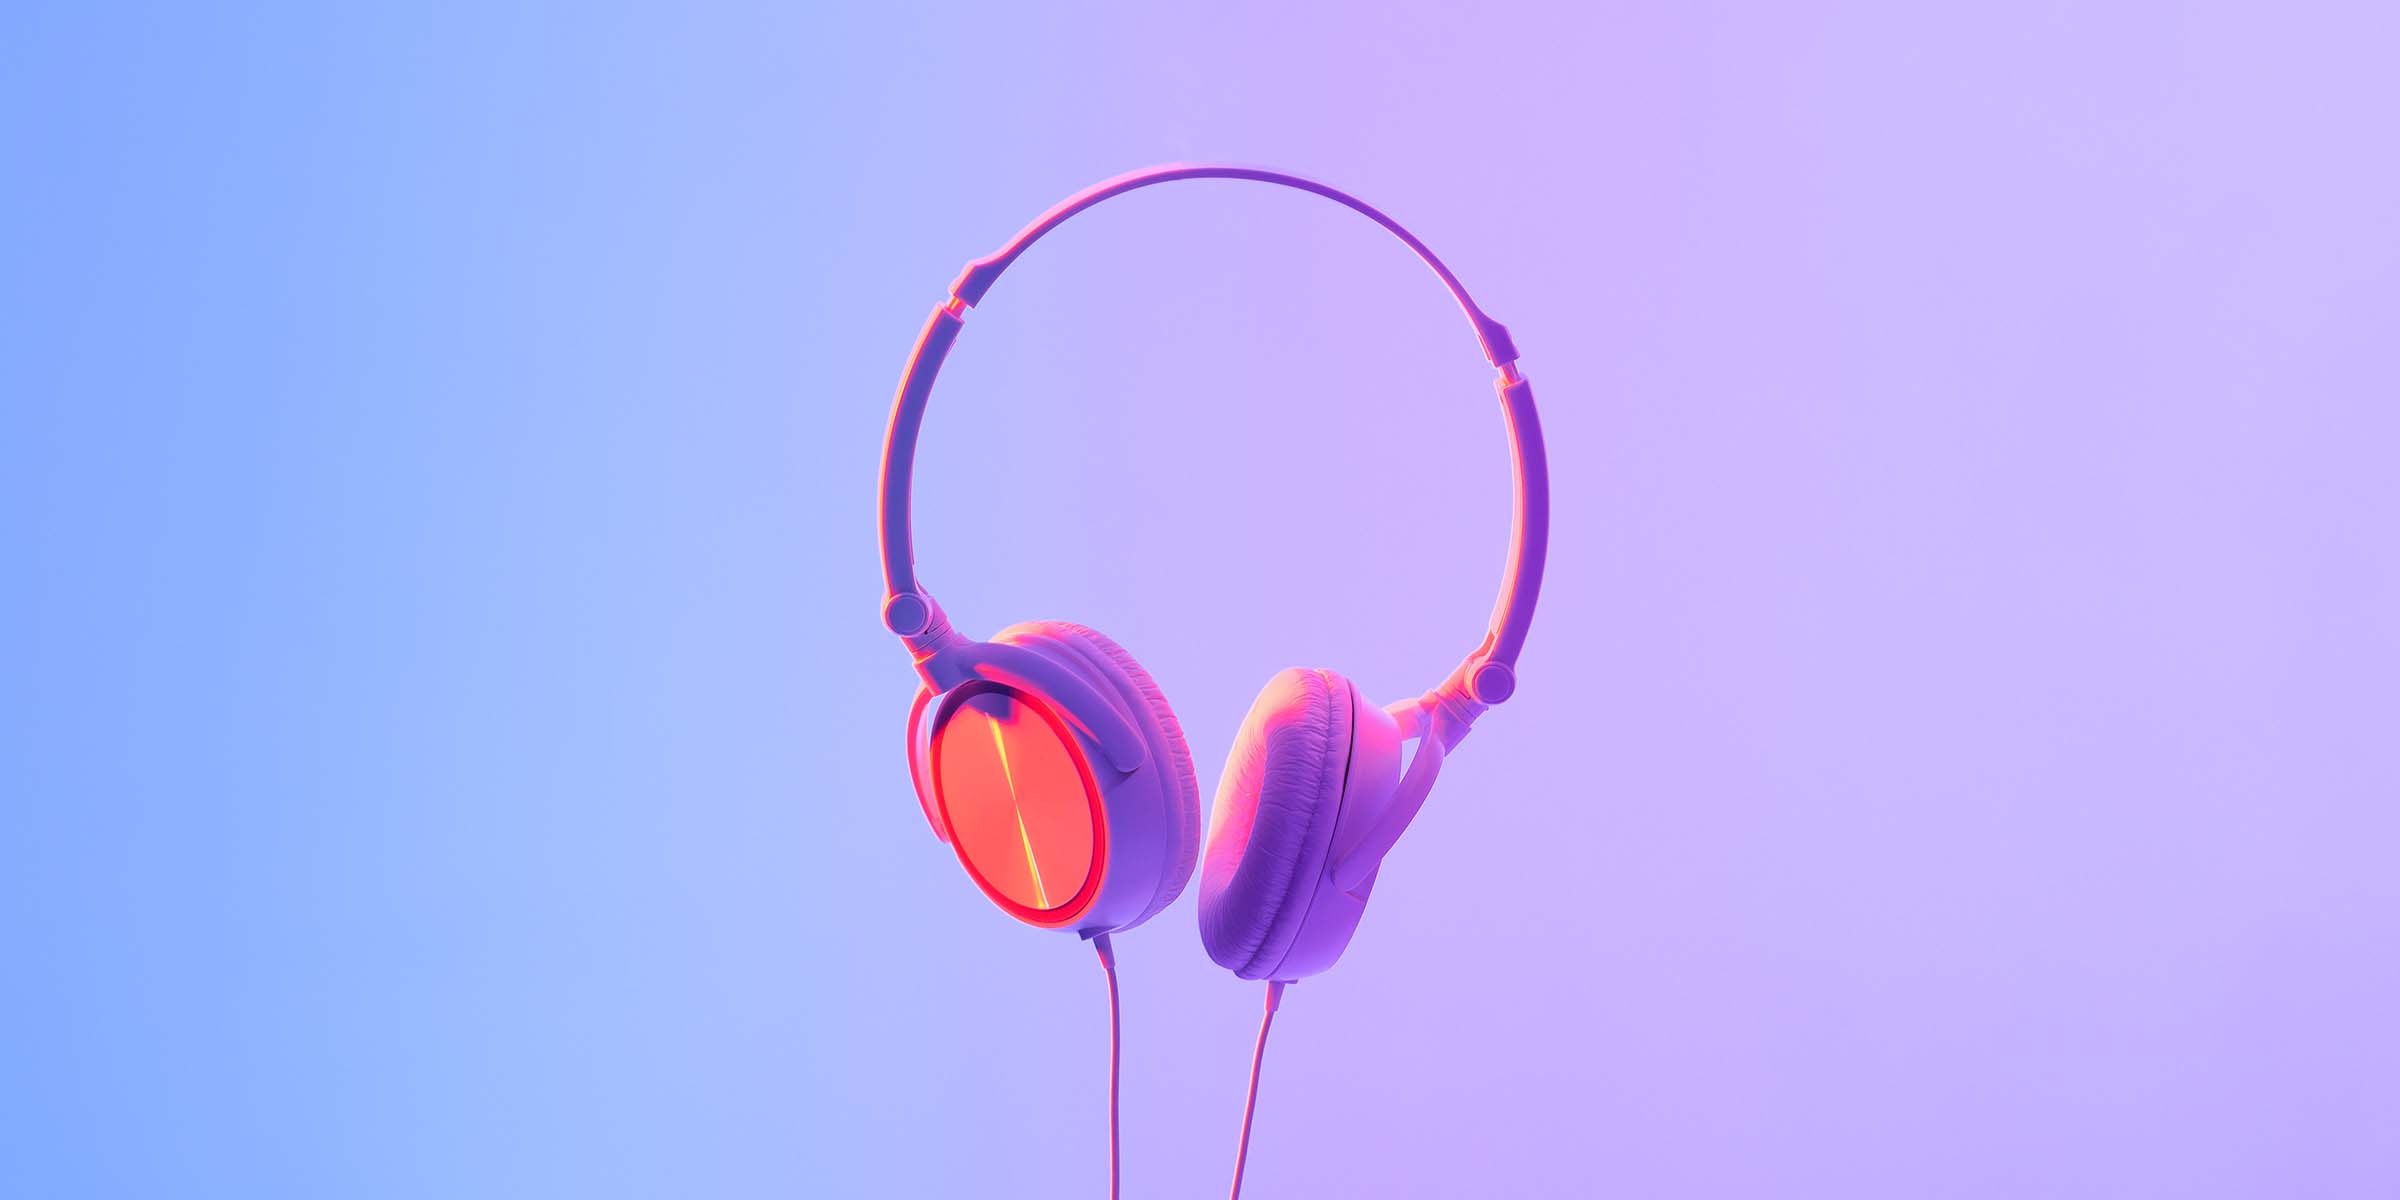 Modern gadget for hipster, technology, youth style, favorite music and device for relaxation in free time. White headphones hang in air, in neon, studio shot, flat lay, free space, cut out